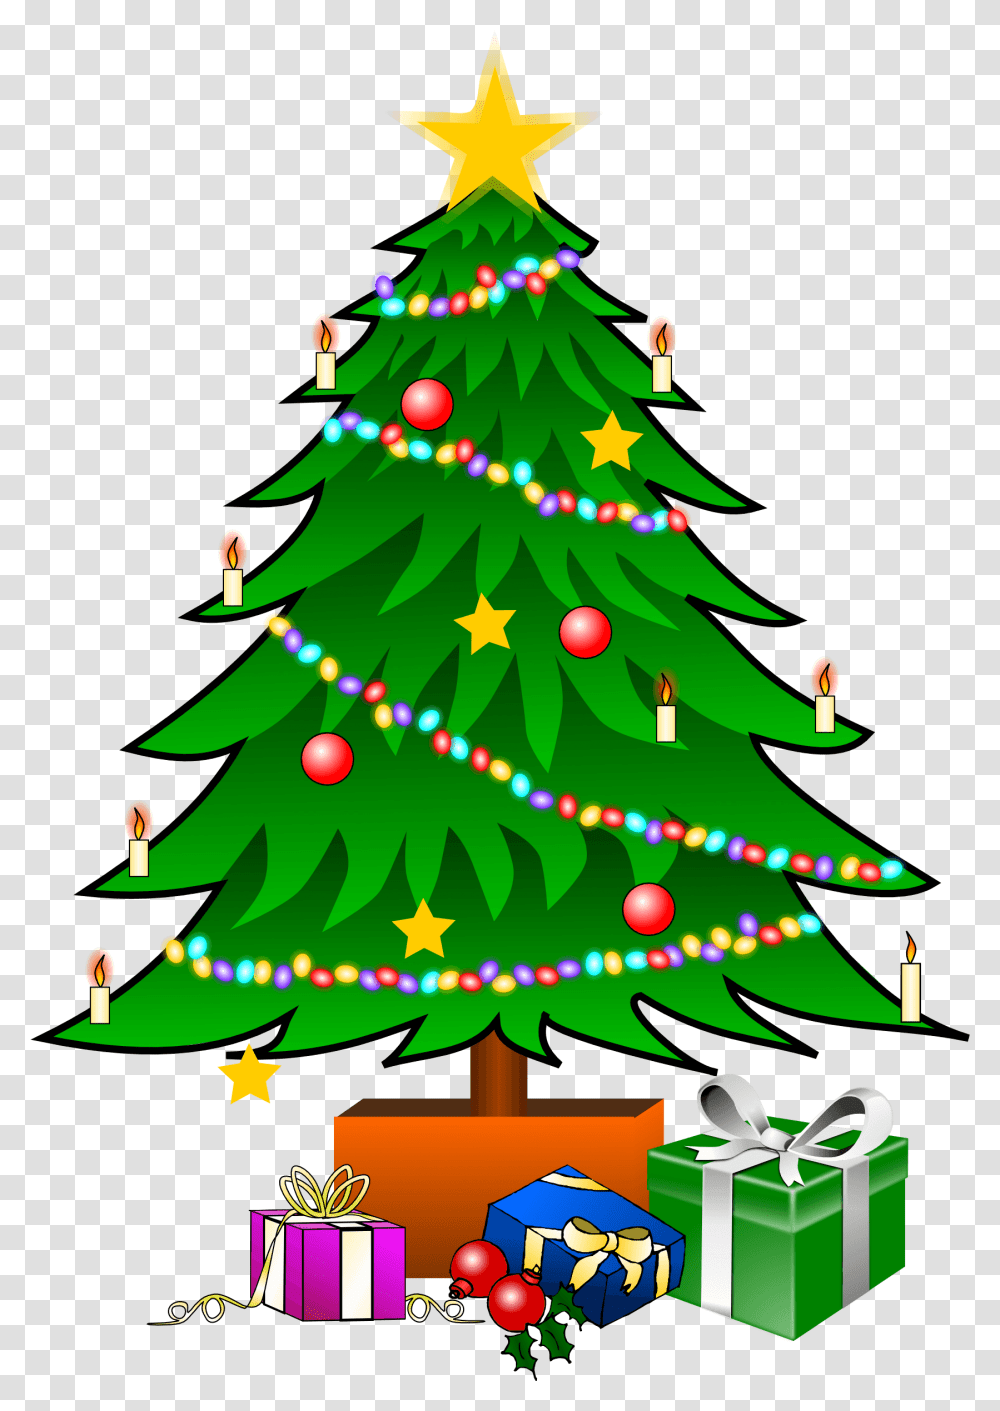 Christmas Vector Image Christmas Tree Vector, Ornament, Plant, Star Symbol Transparent Png